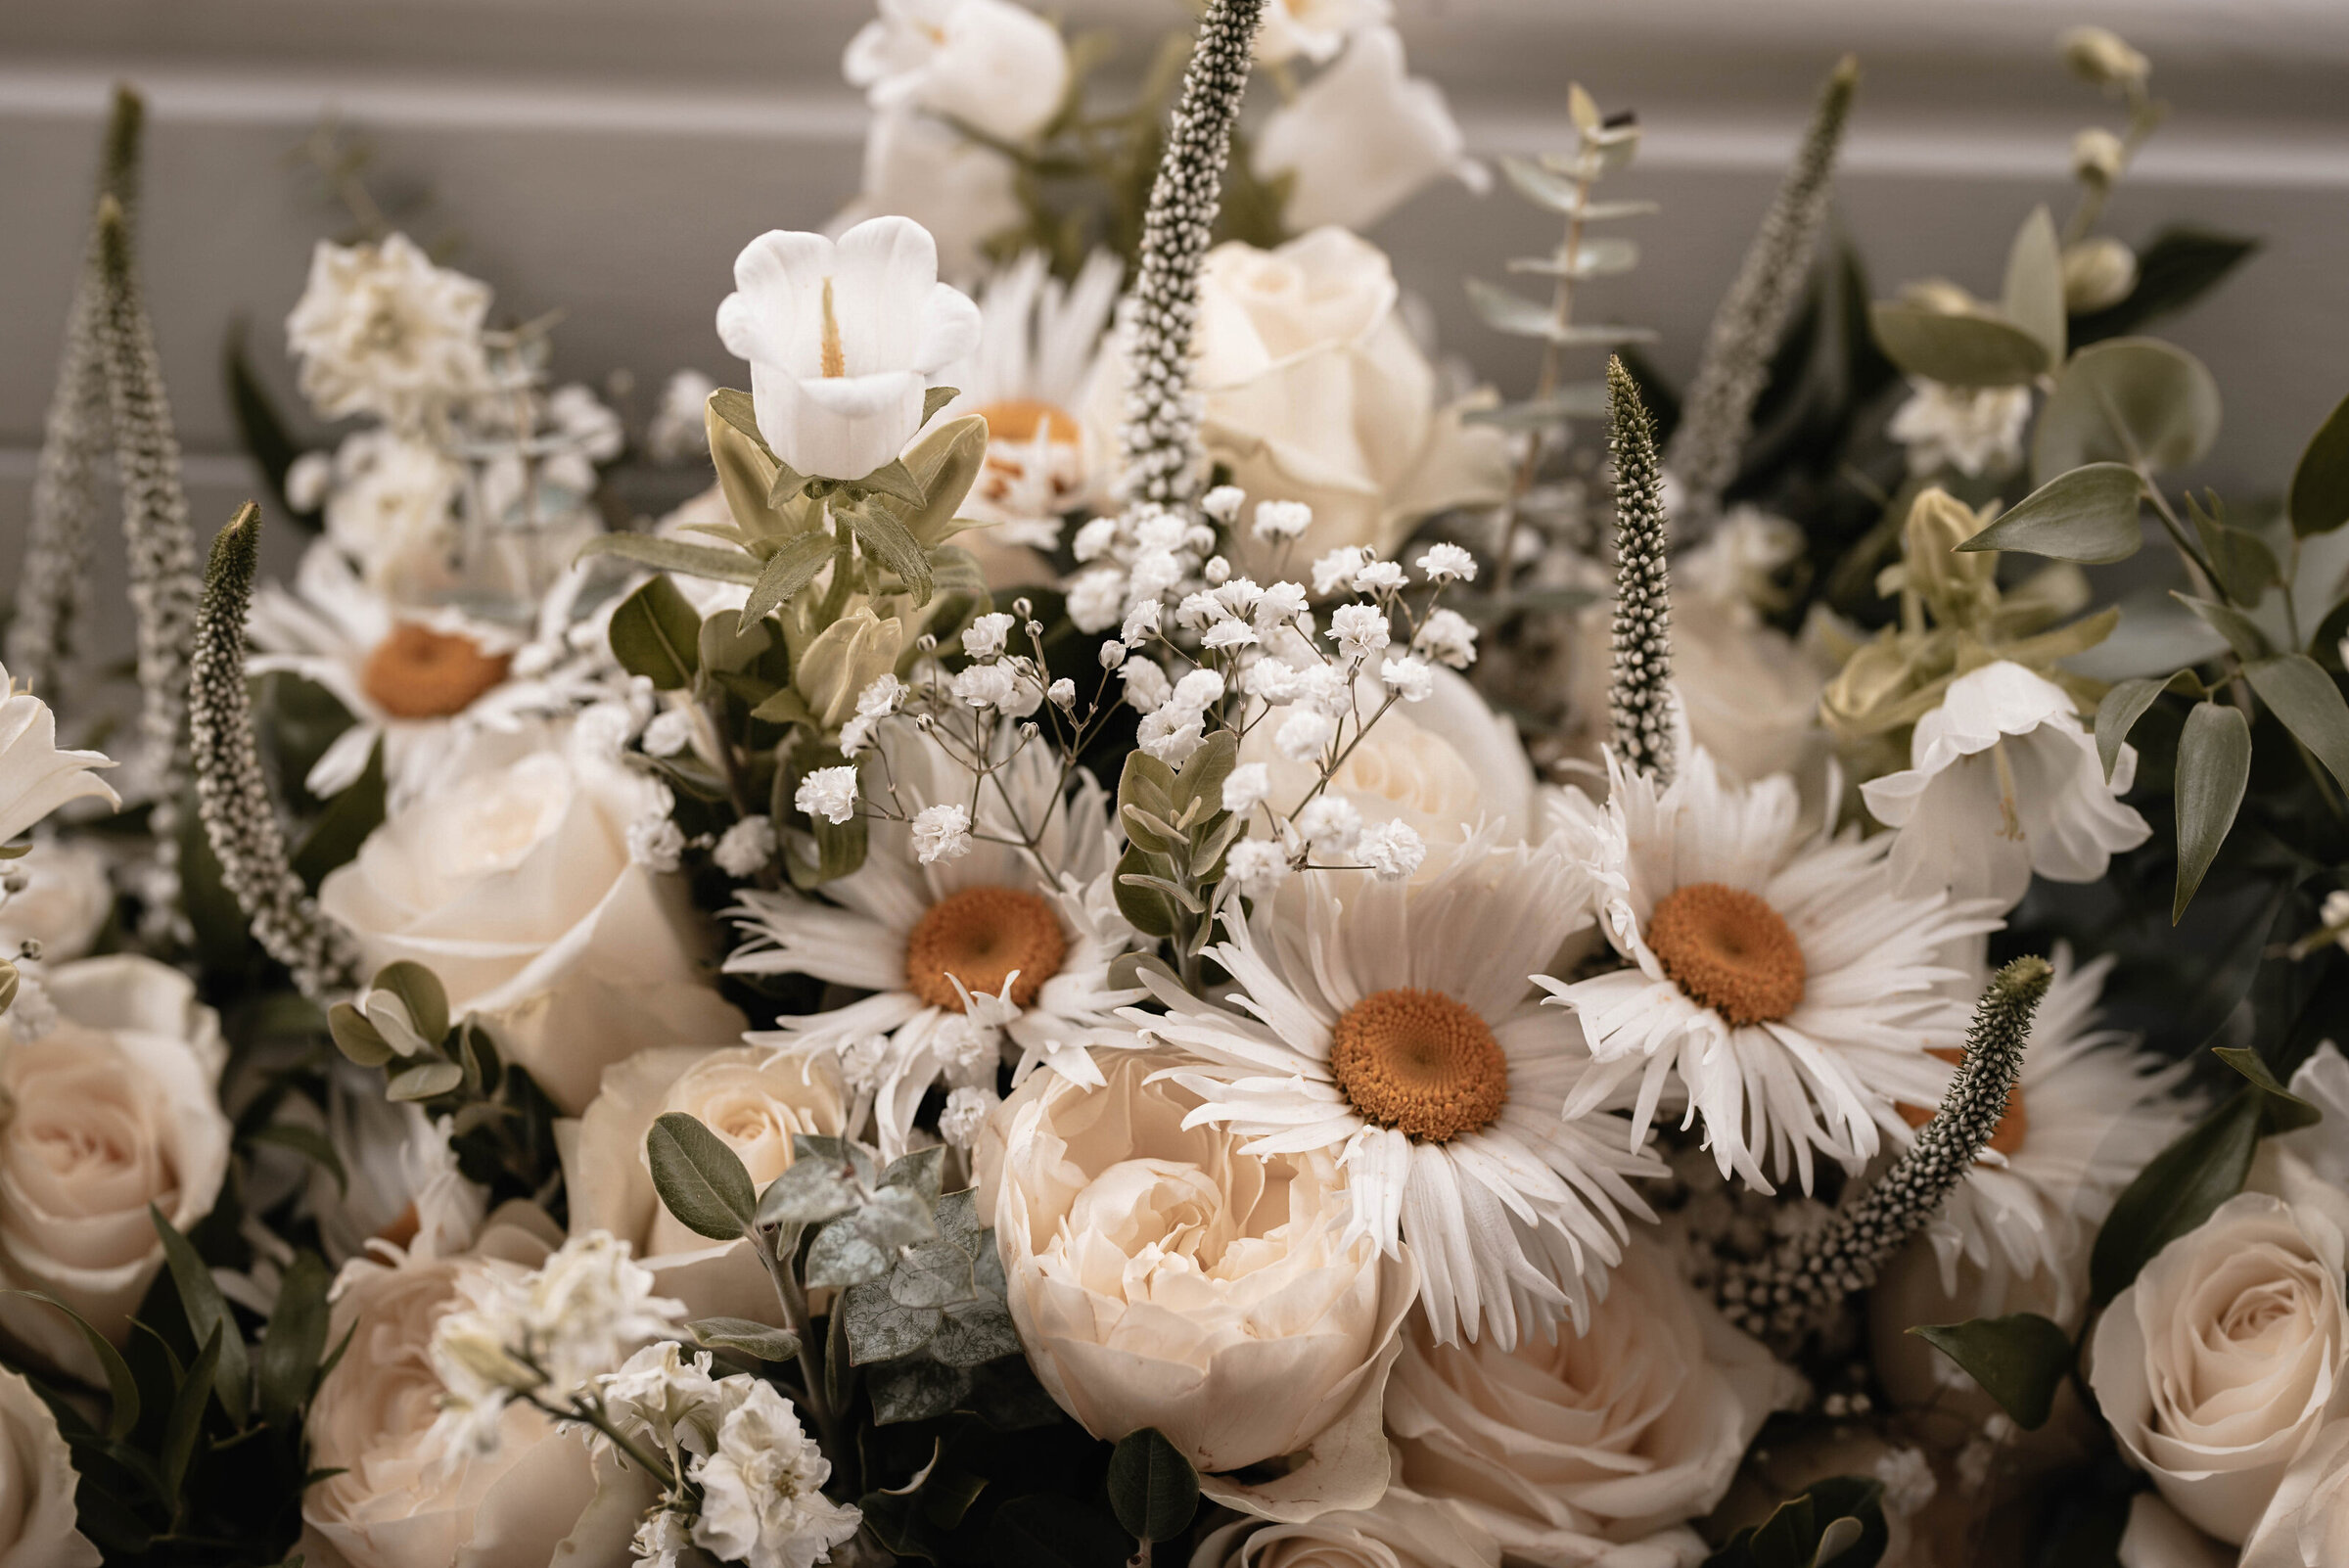 Close up of bridal bouquet filled with gypsophila, daisies, roses and eucalyptus